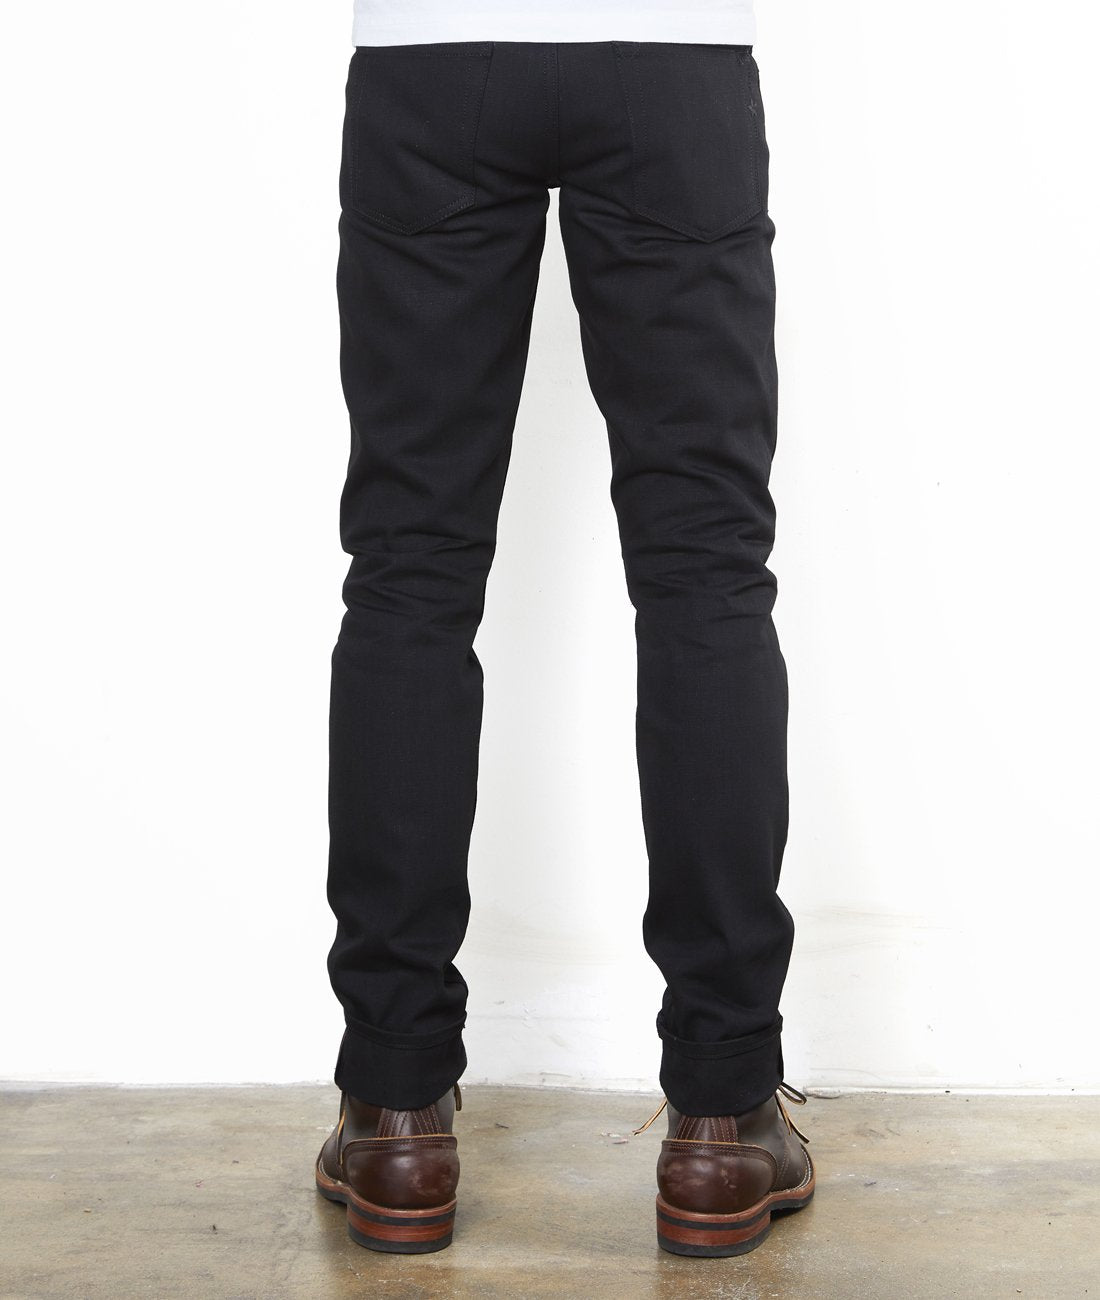 Brave Star Selvage, Jeans